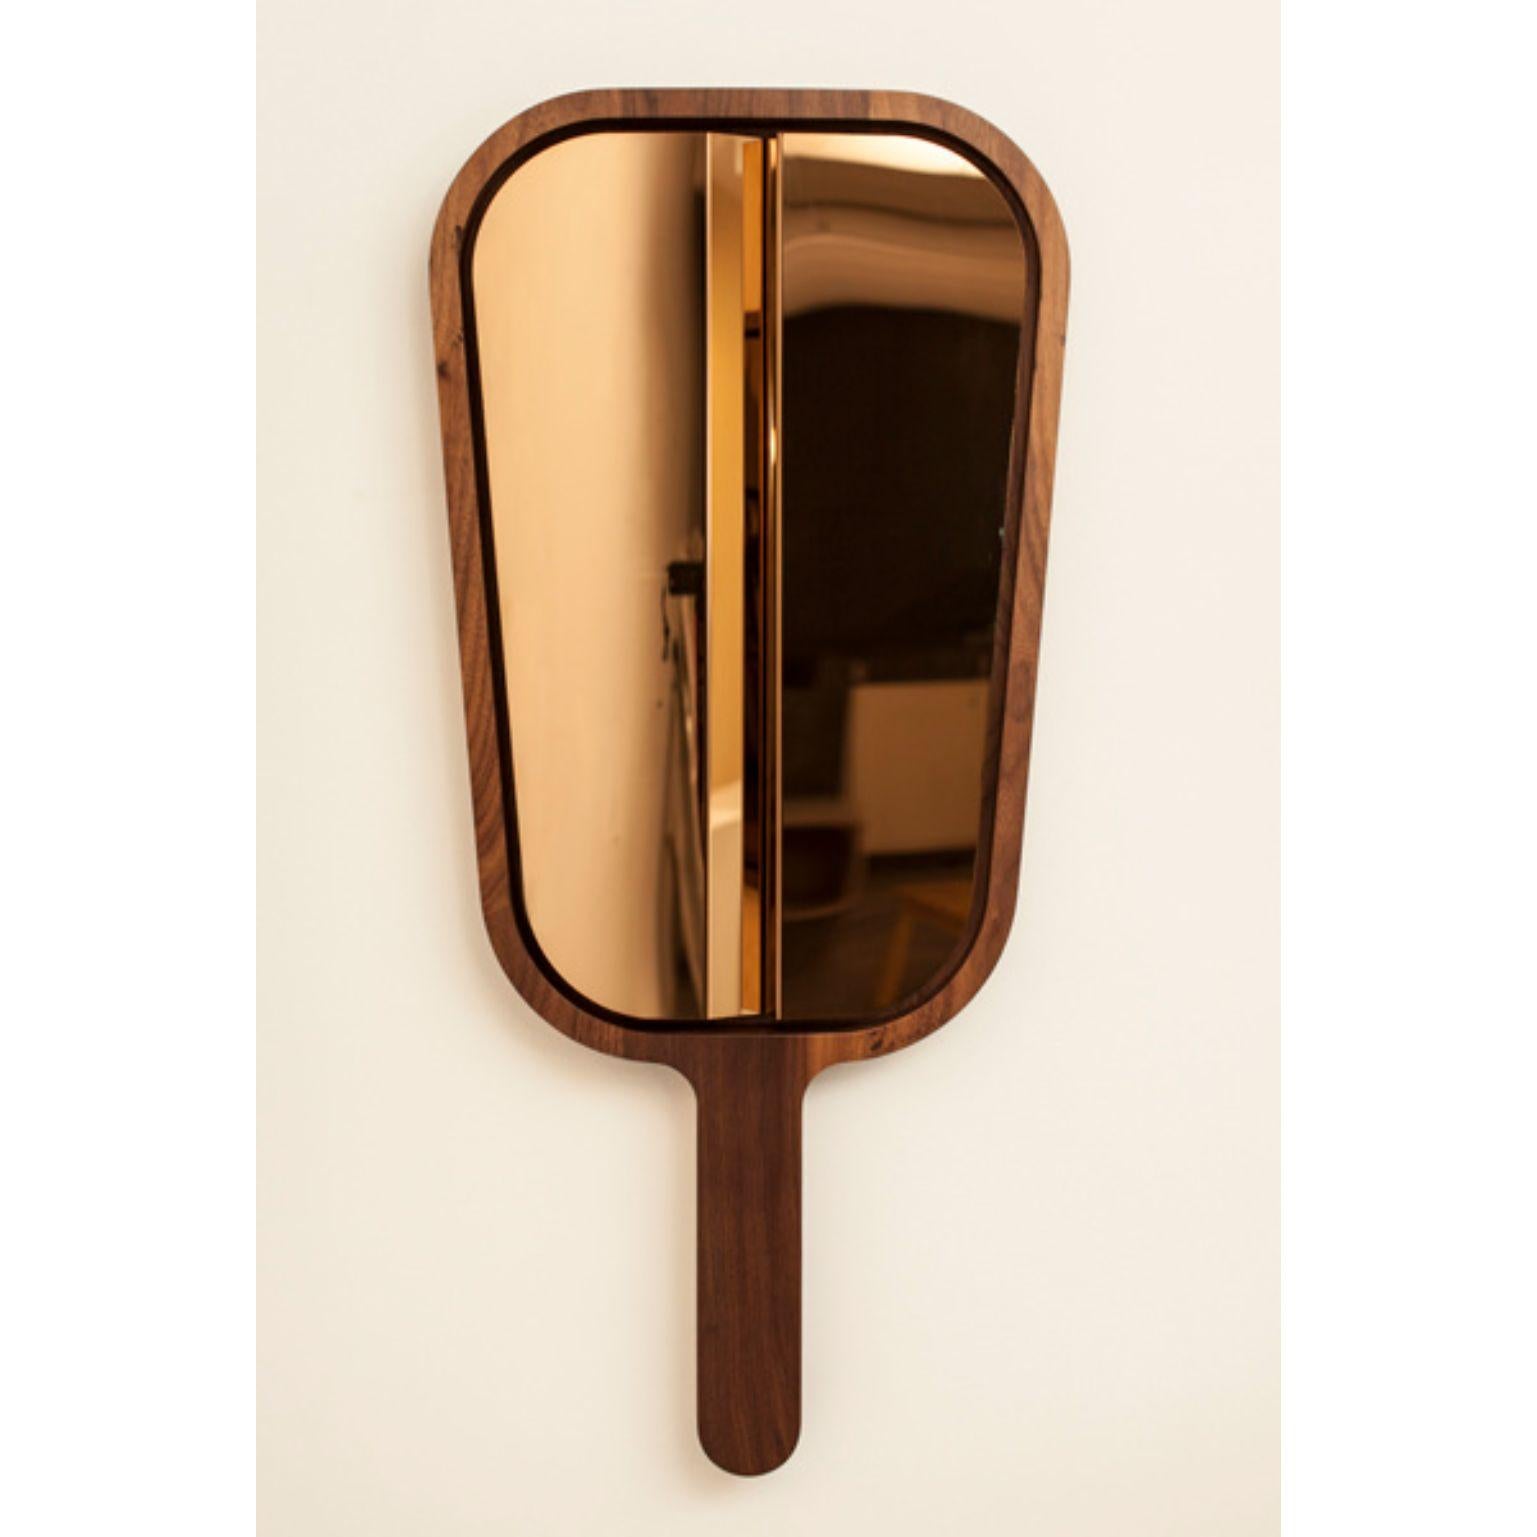 Please Don't Tell Mom mirror 2 by Marc Dibeh
2015
Materials: American walnut, polished stainless steel, rose gold finish
Dimensions: W 48 x H 90 x D 4 cm 

This happy accident, caused by coincidently breaking a mirror during an experiment, lead